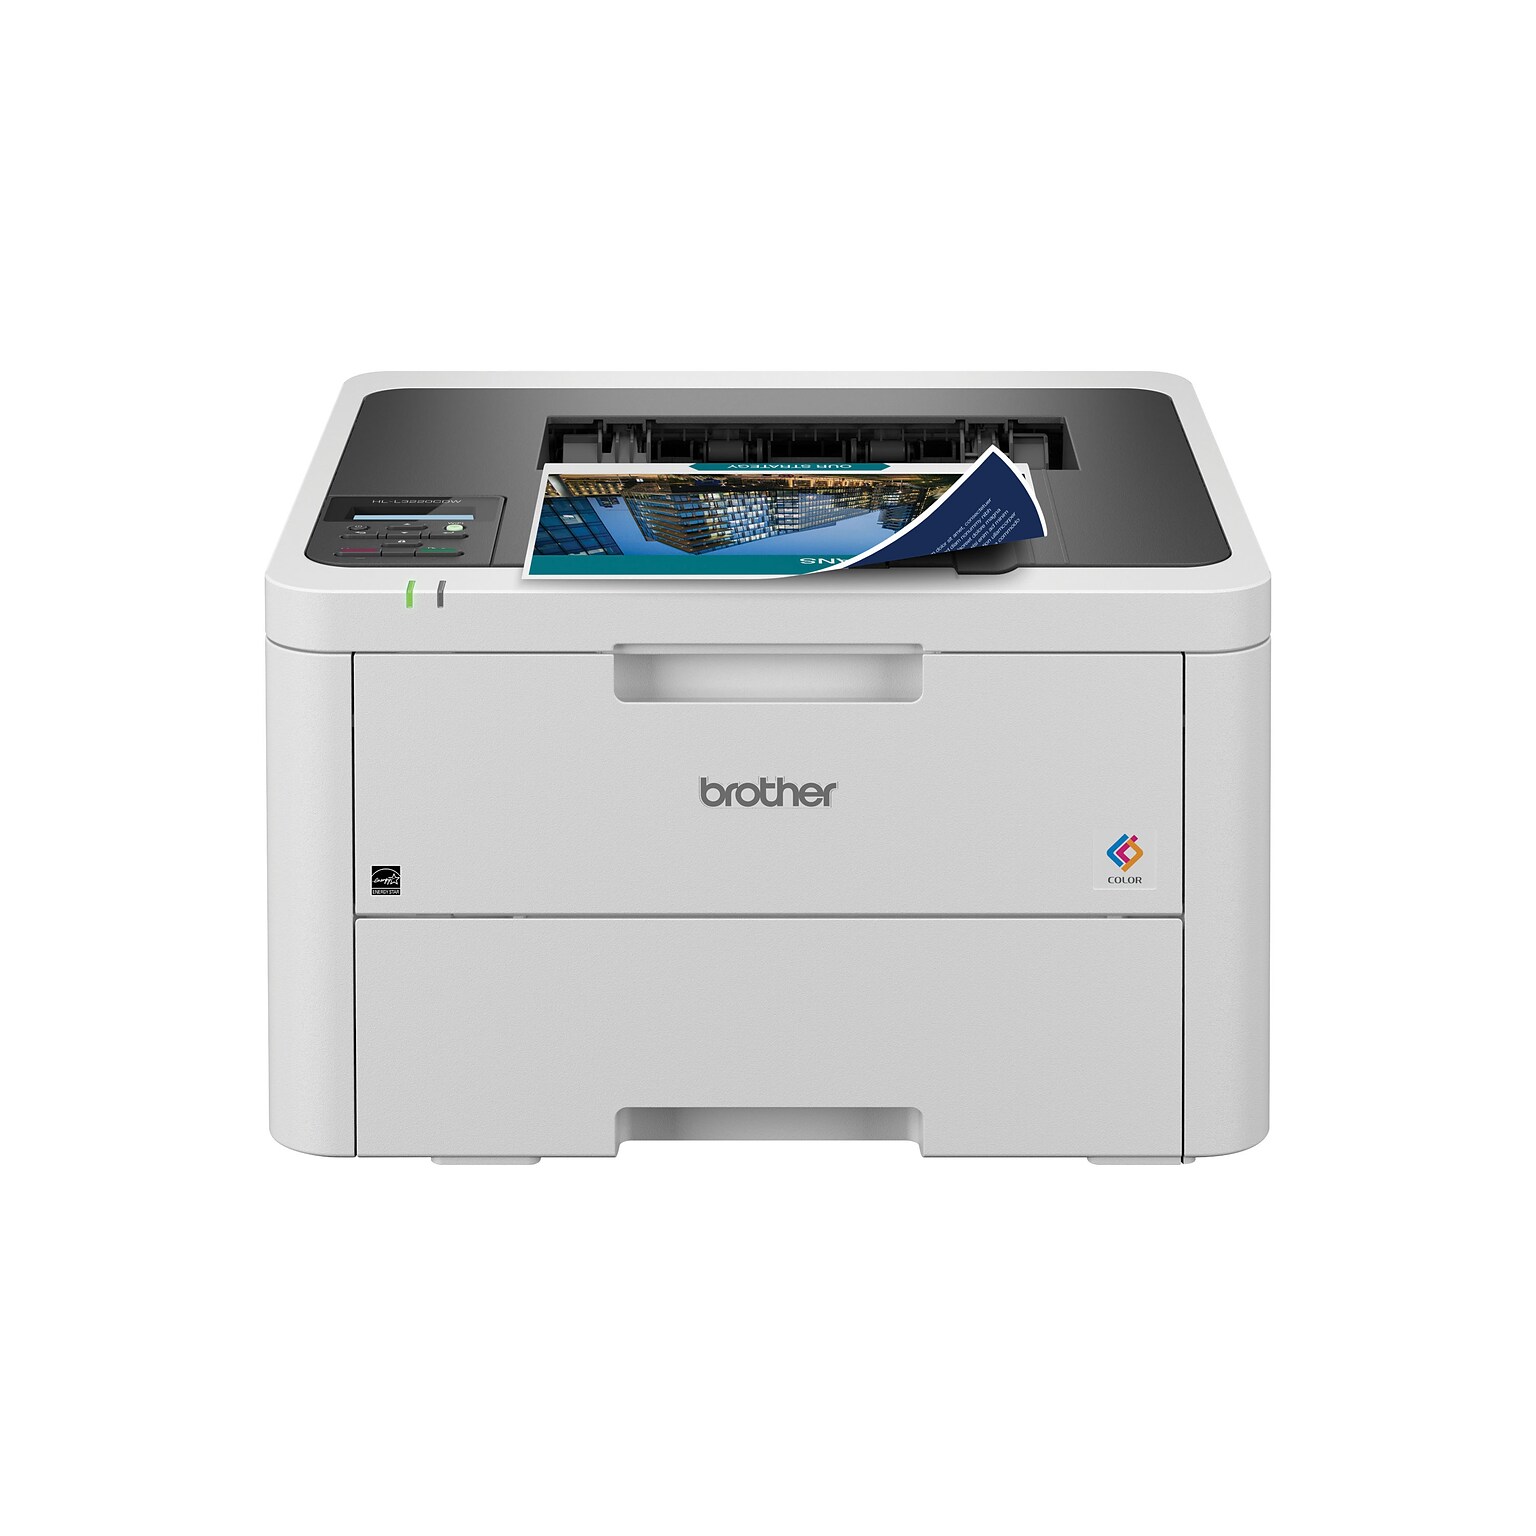 Brother Wireless Compact Digital Color Printer HL-L3220CDW, Refresh Subscription Eligible